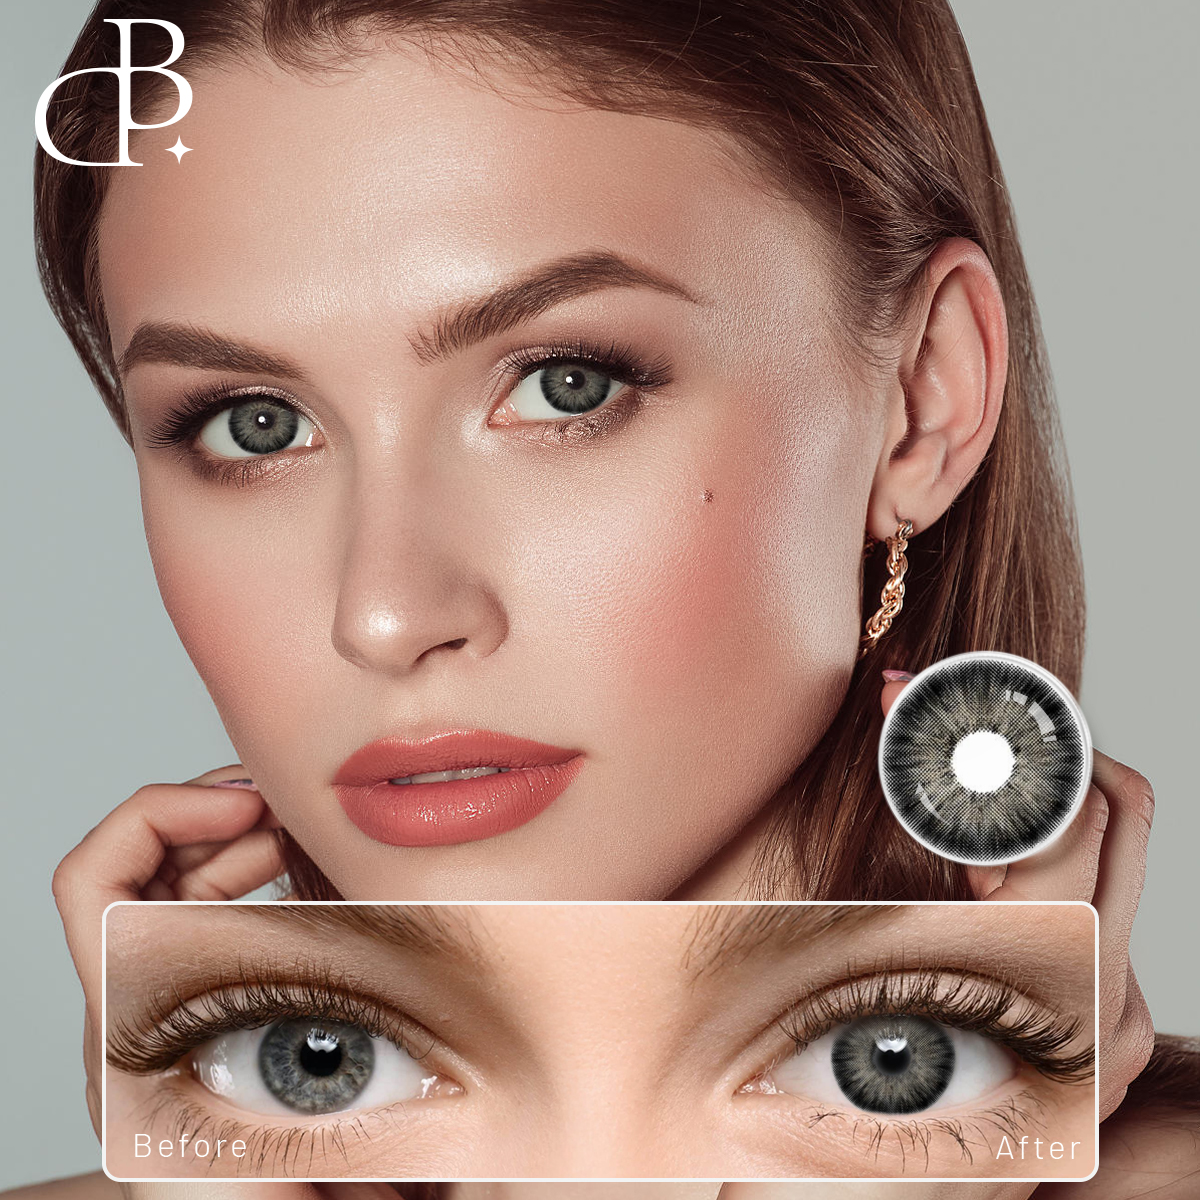 DBeyes Wholesale Price Lenses black Fashion Cosmetic Colored Eye Contact LensPopular